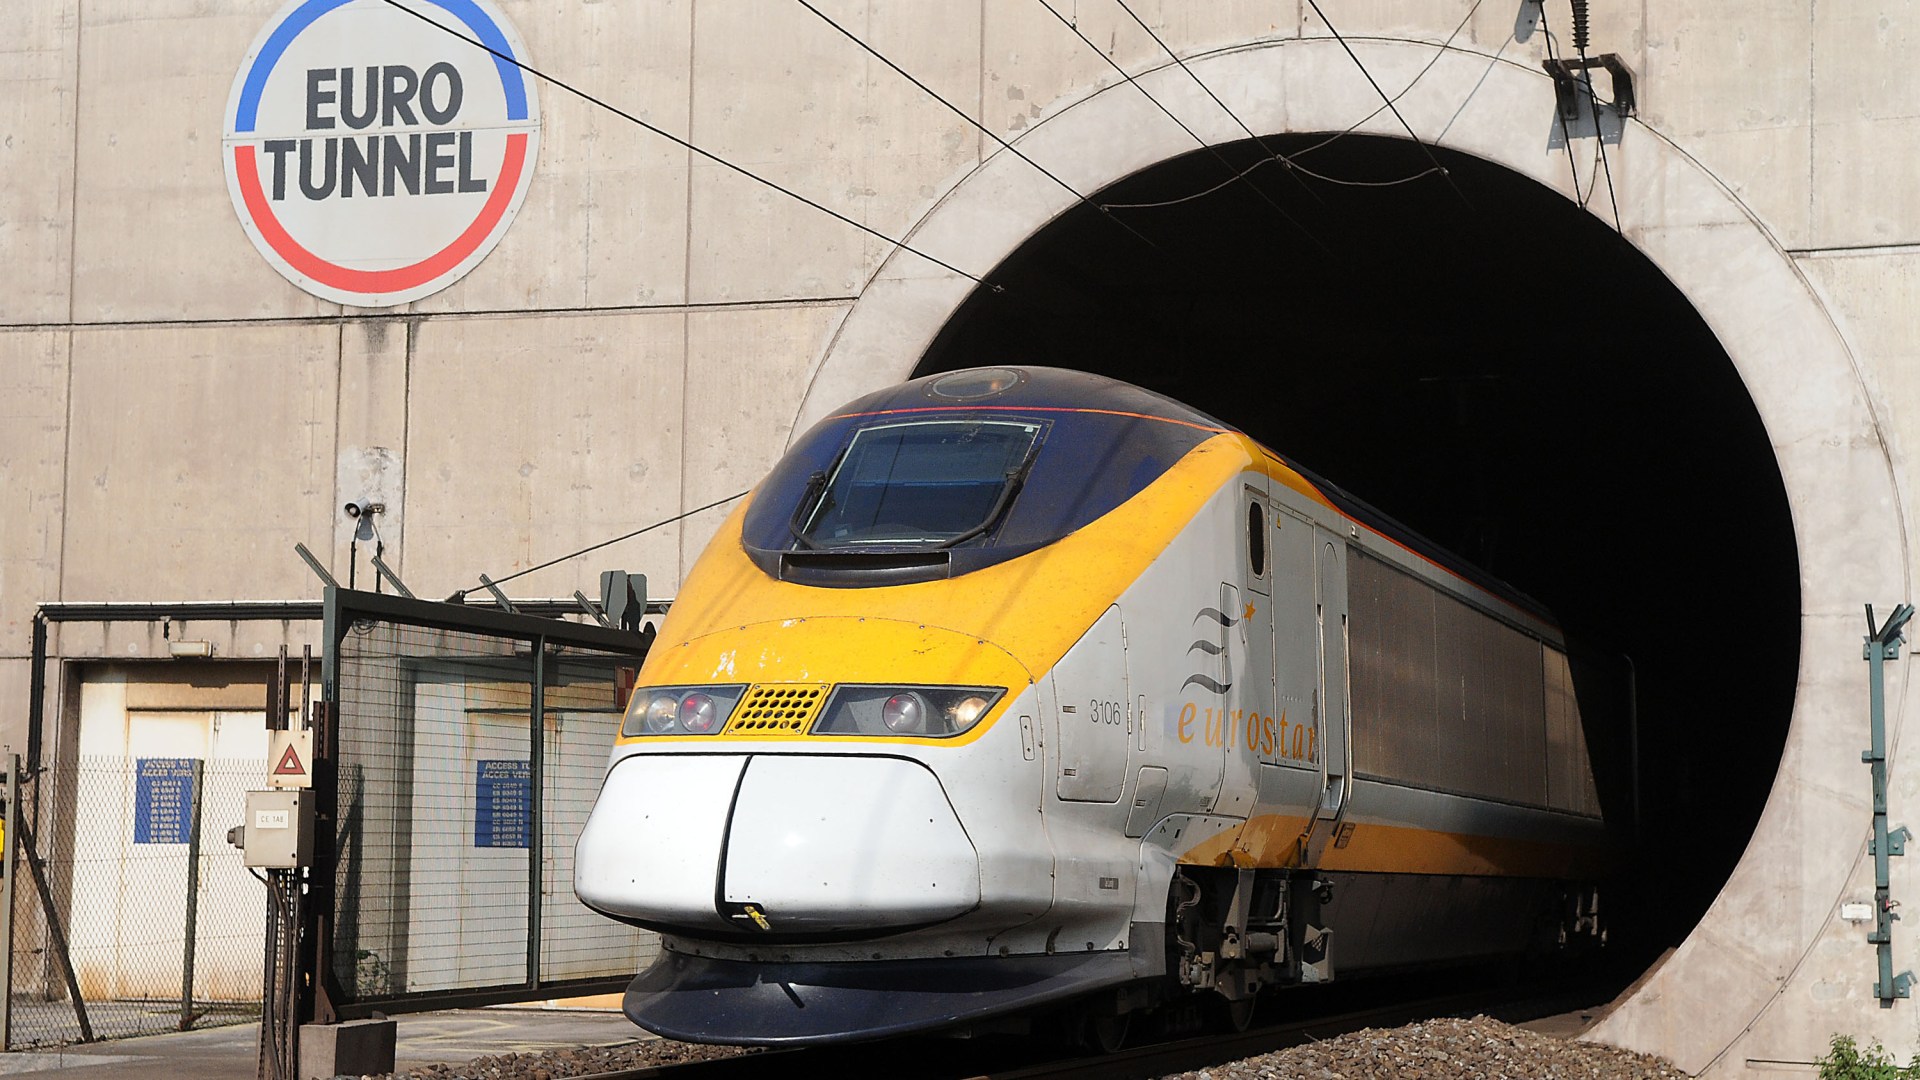 Chaos for travellers as Eurotunnel services SUSPENDED due to ‘incident’ at UK side as explosives experts rush to scene